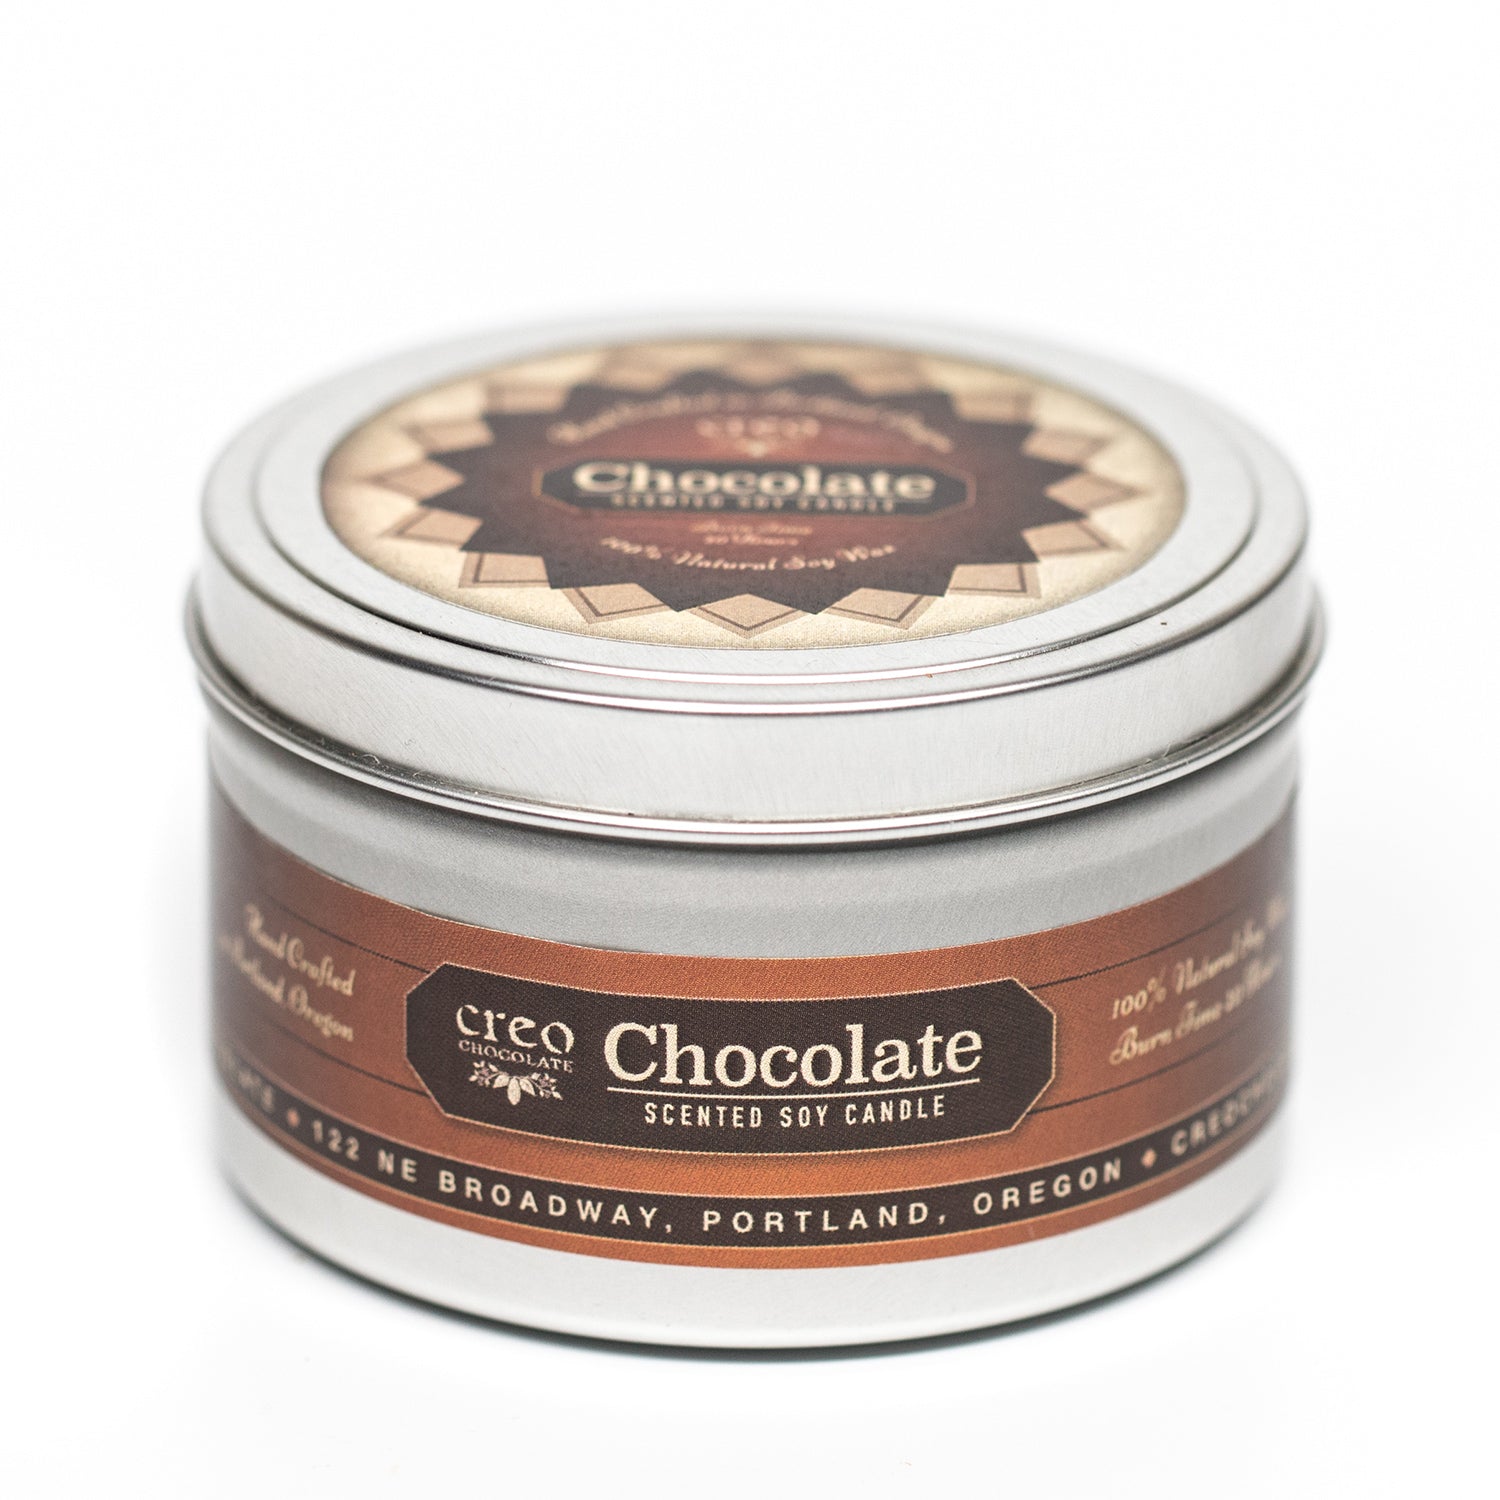 Chocolate Scented Candle - Creo Chocolate